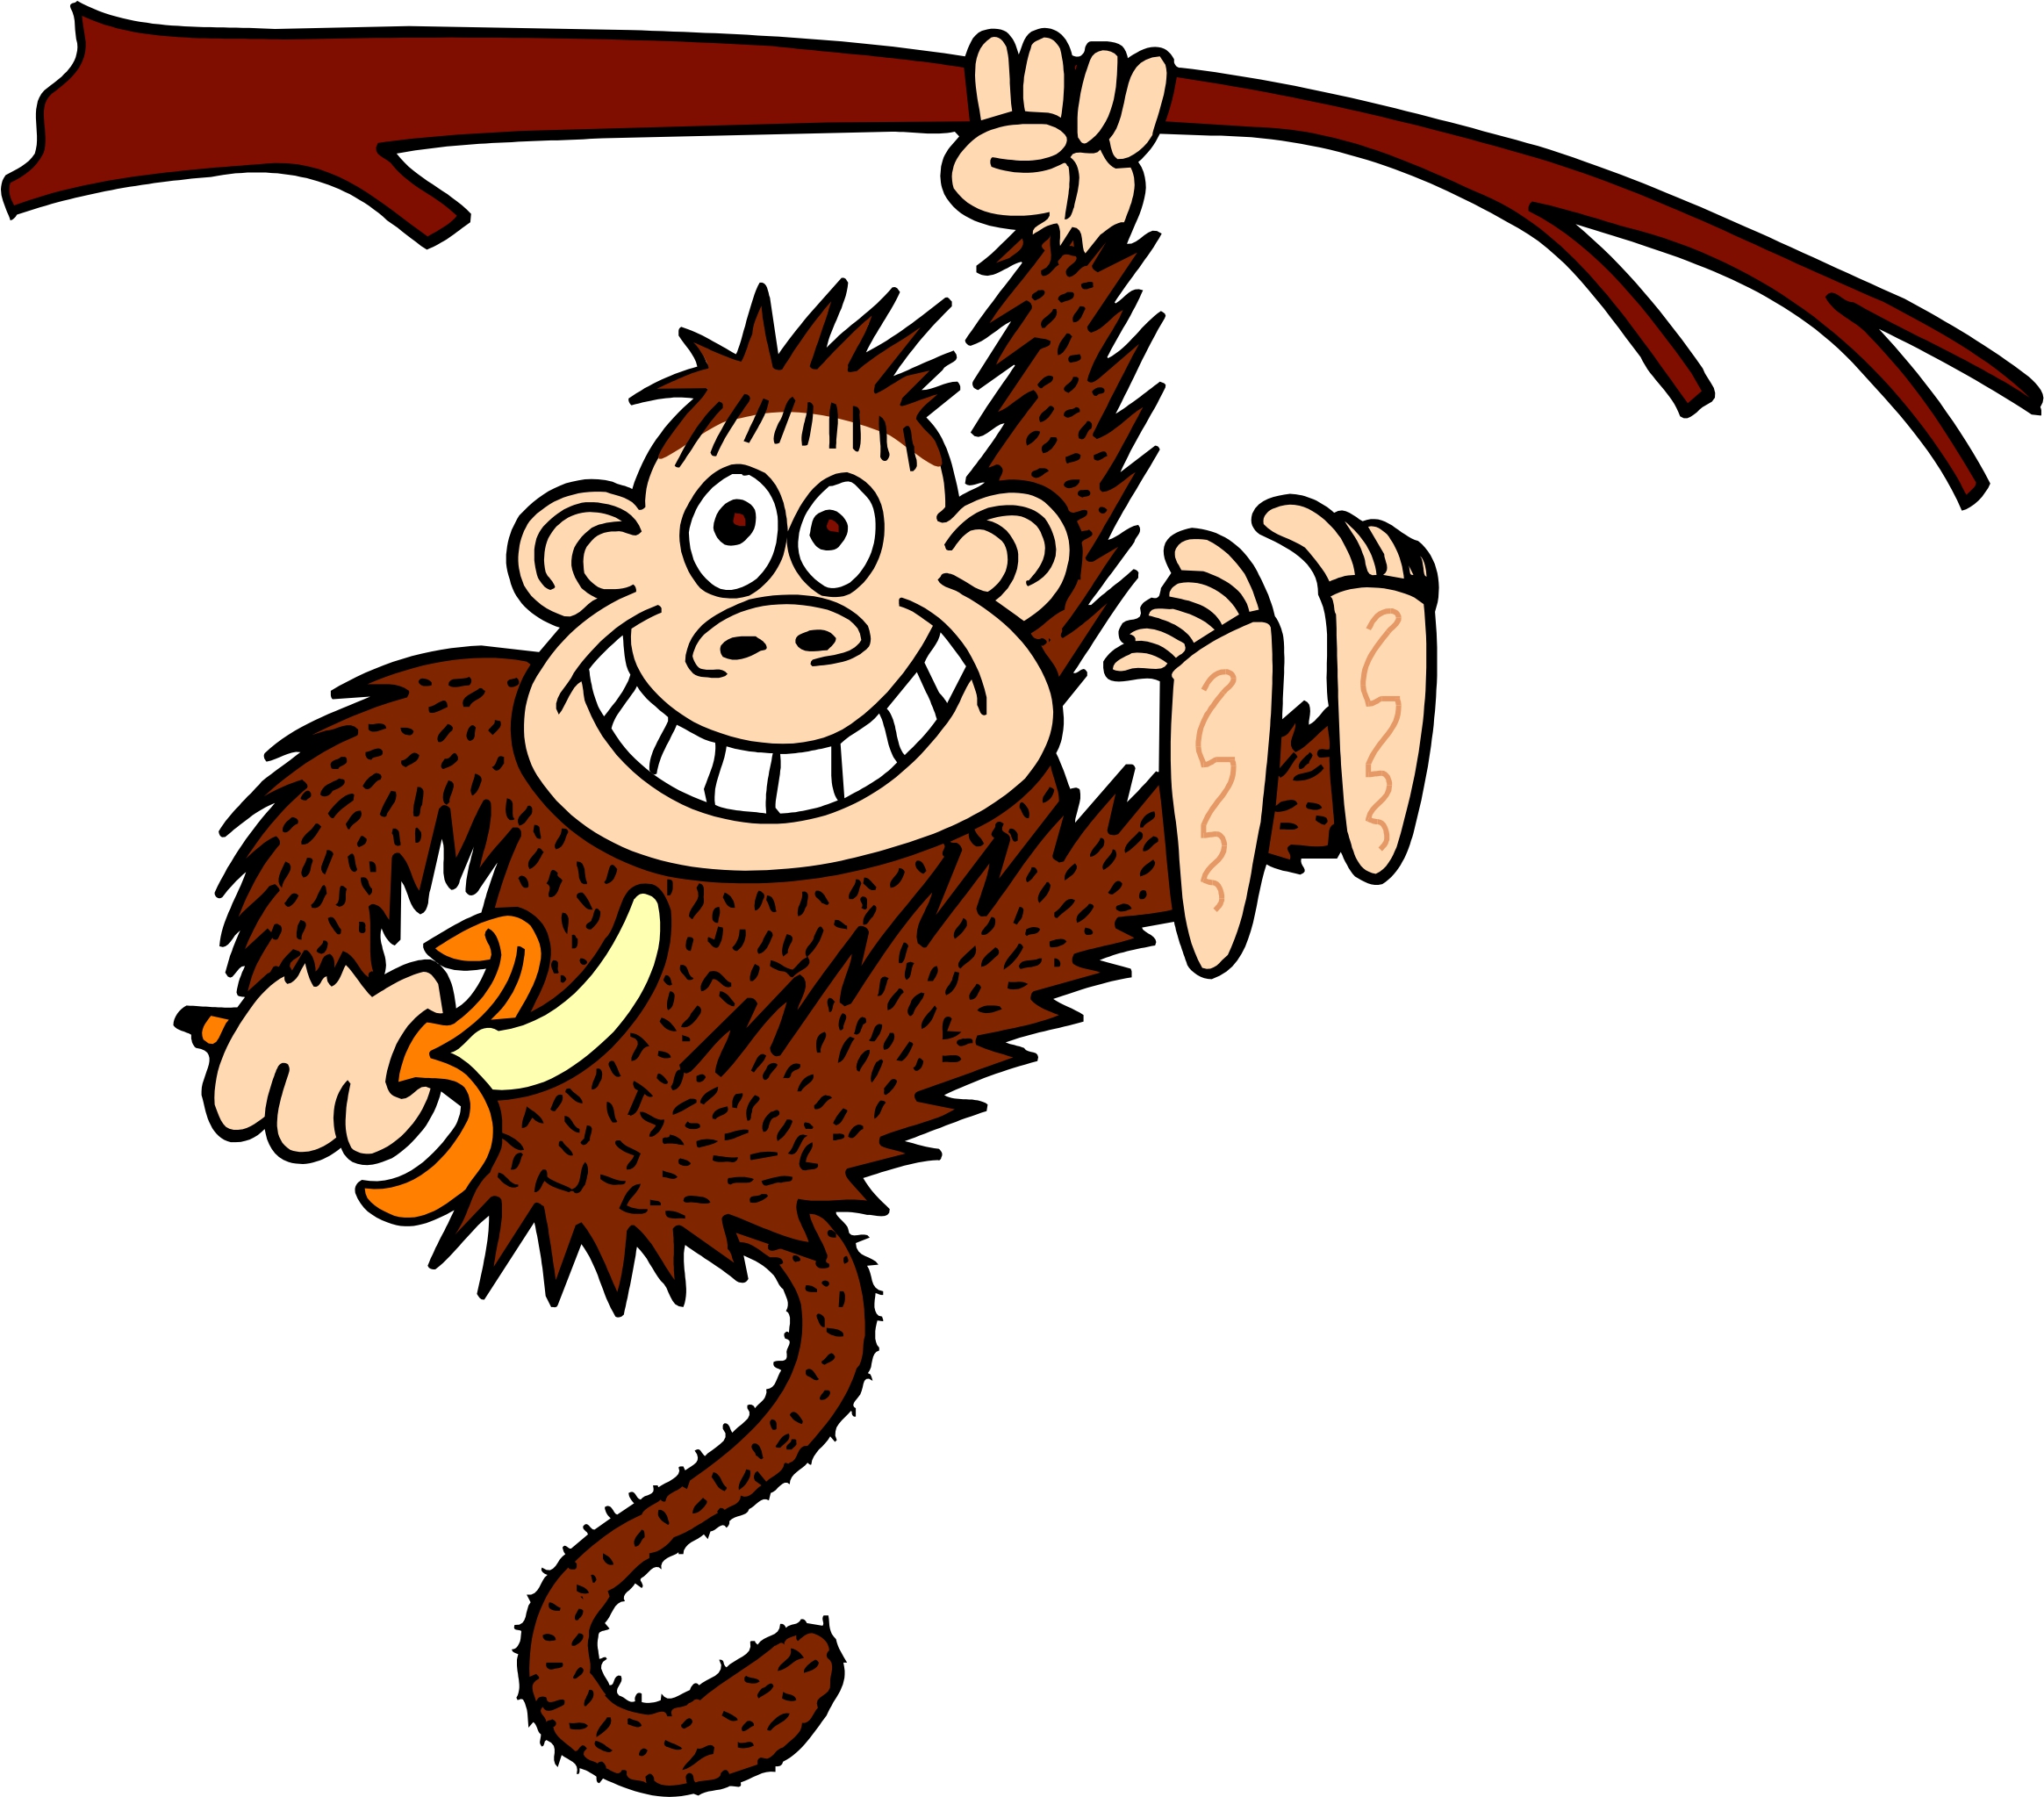 Monkey Cartoon Pictures For Kids - ClipArt Best